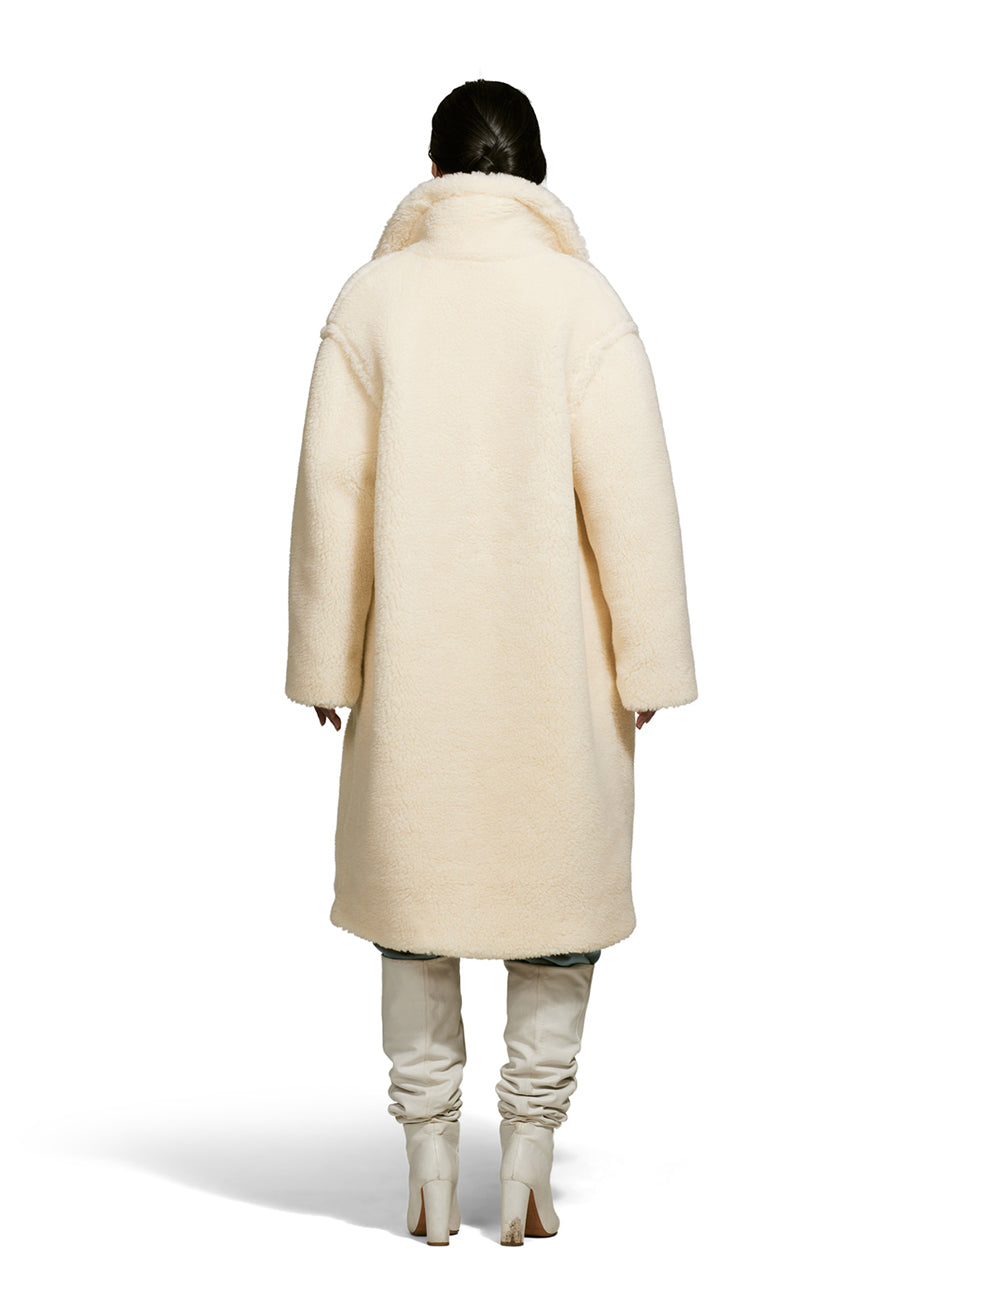 Female model wearing a teddy-inspired faux-fur sherpa shell in cream color on a white background from the back.